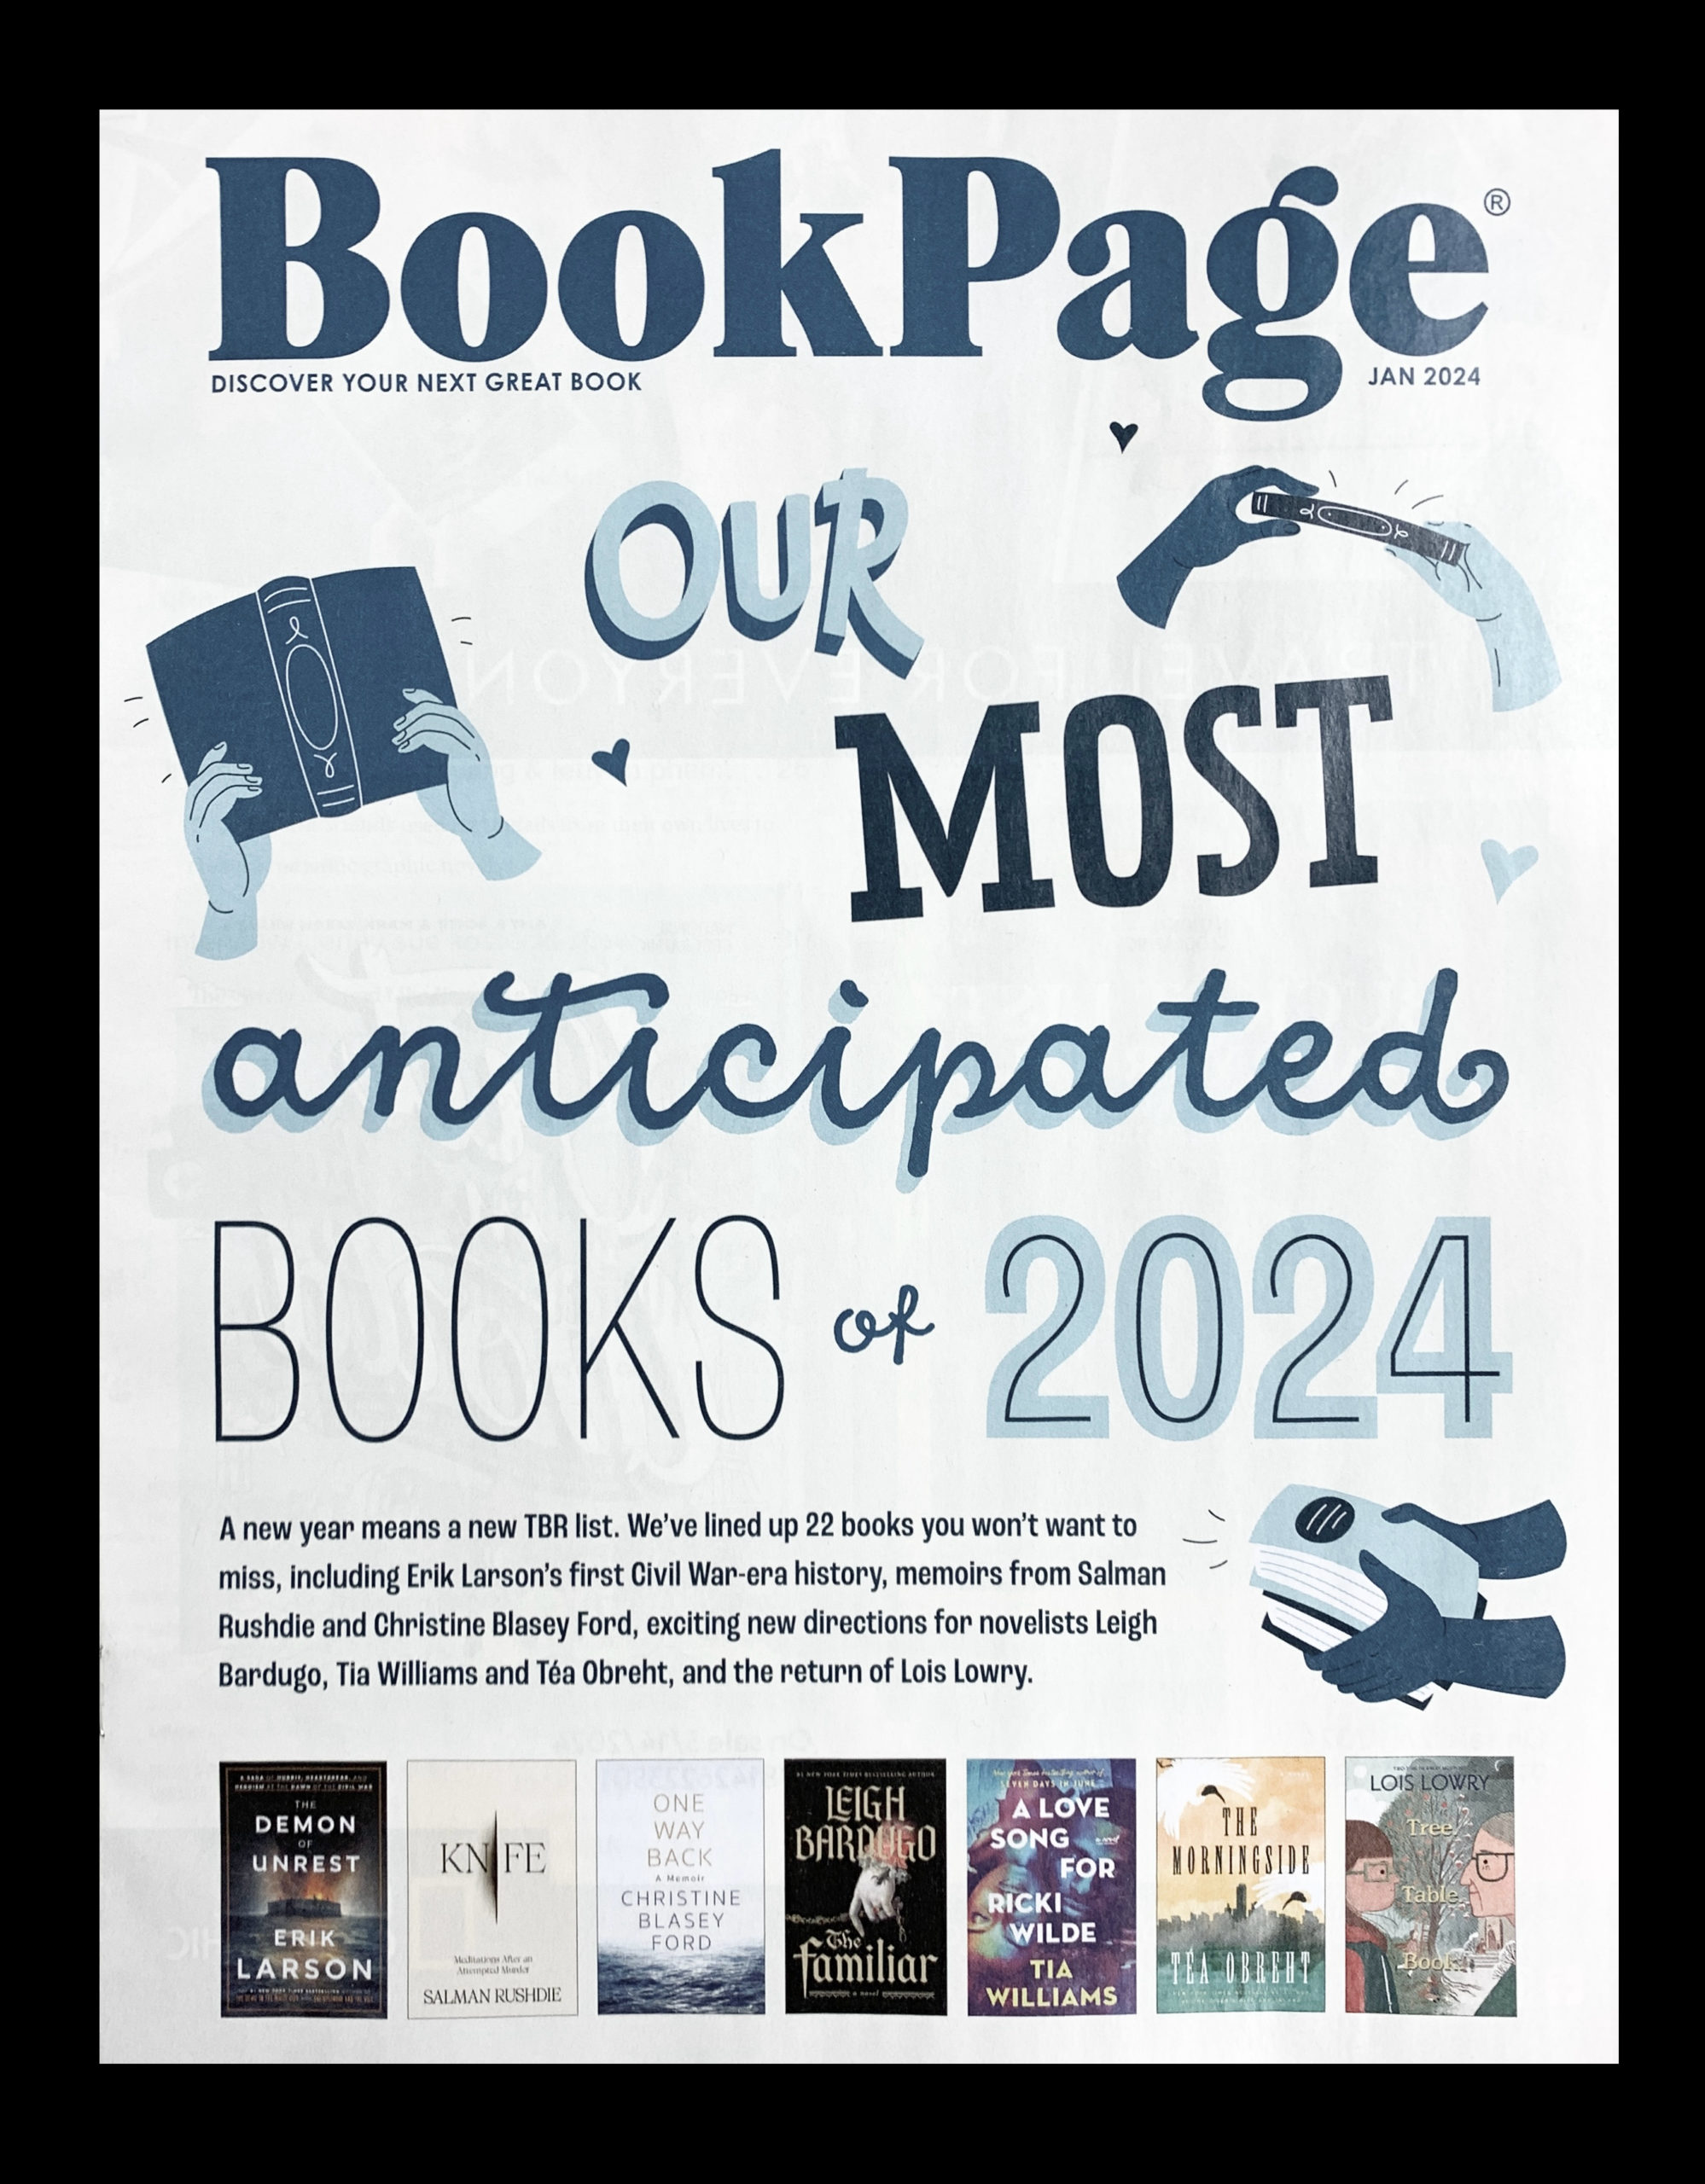 Cover of the January 2024 issue of Book Page magazine.